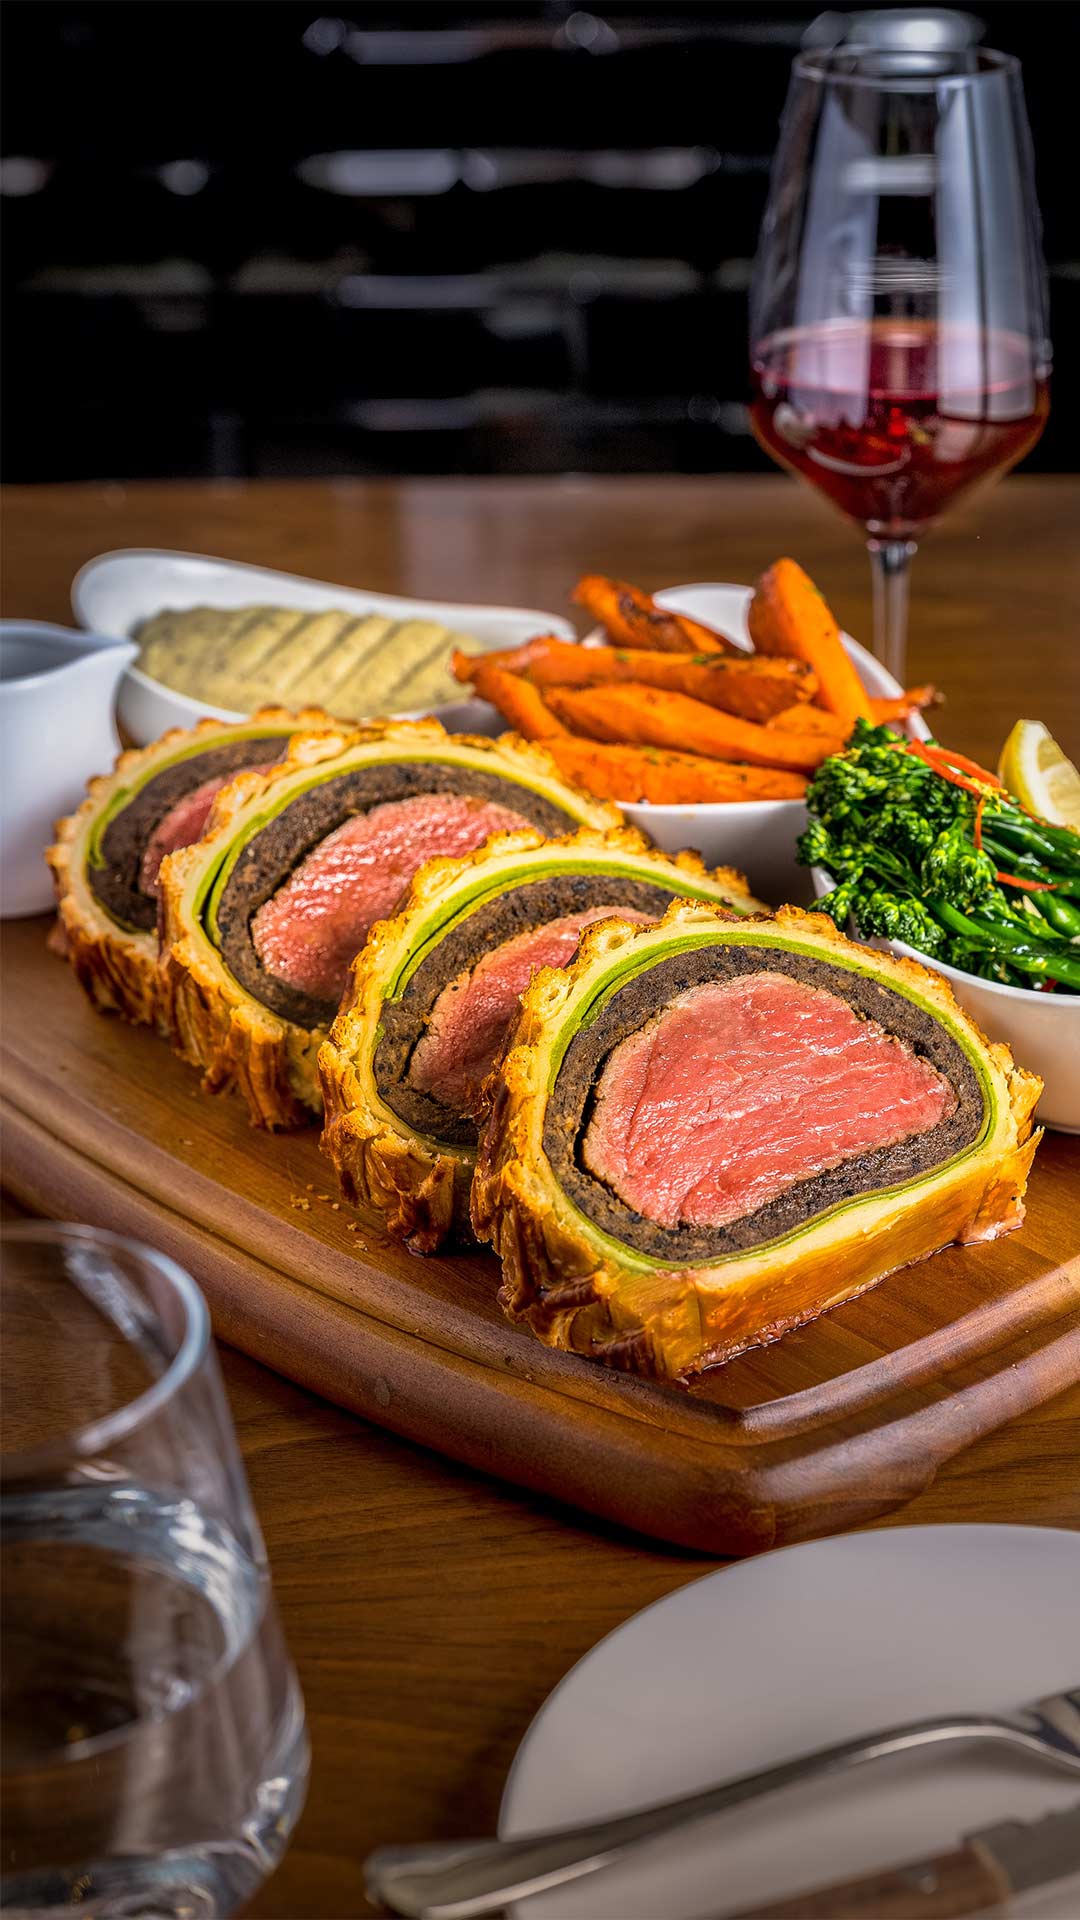 The famed Beef Wellington by Gordon Ramsay at the best dinner place in Singapore